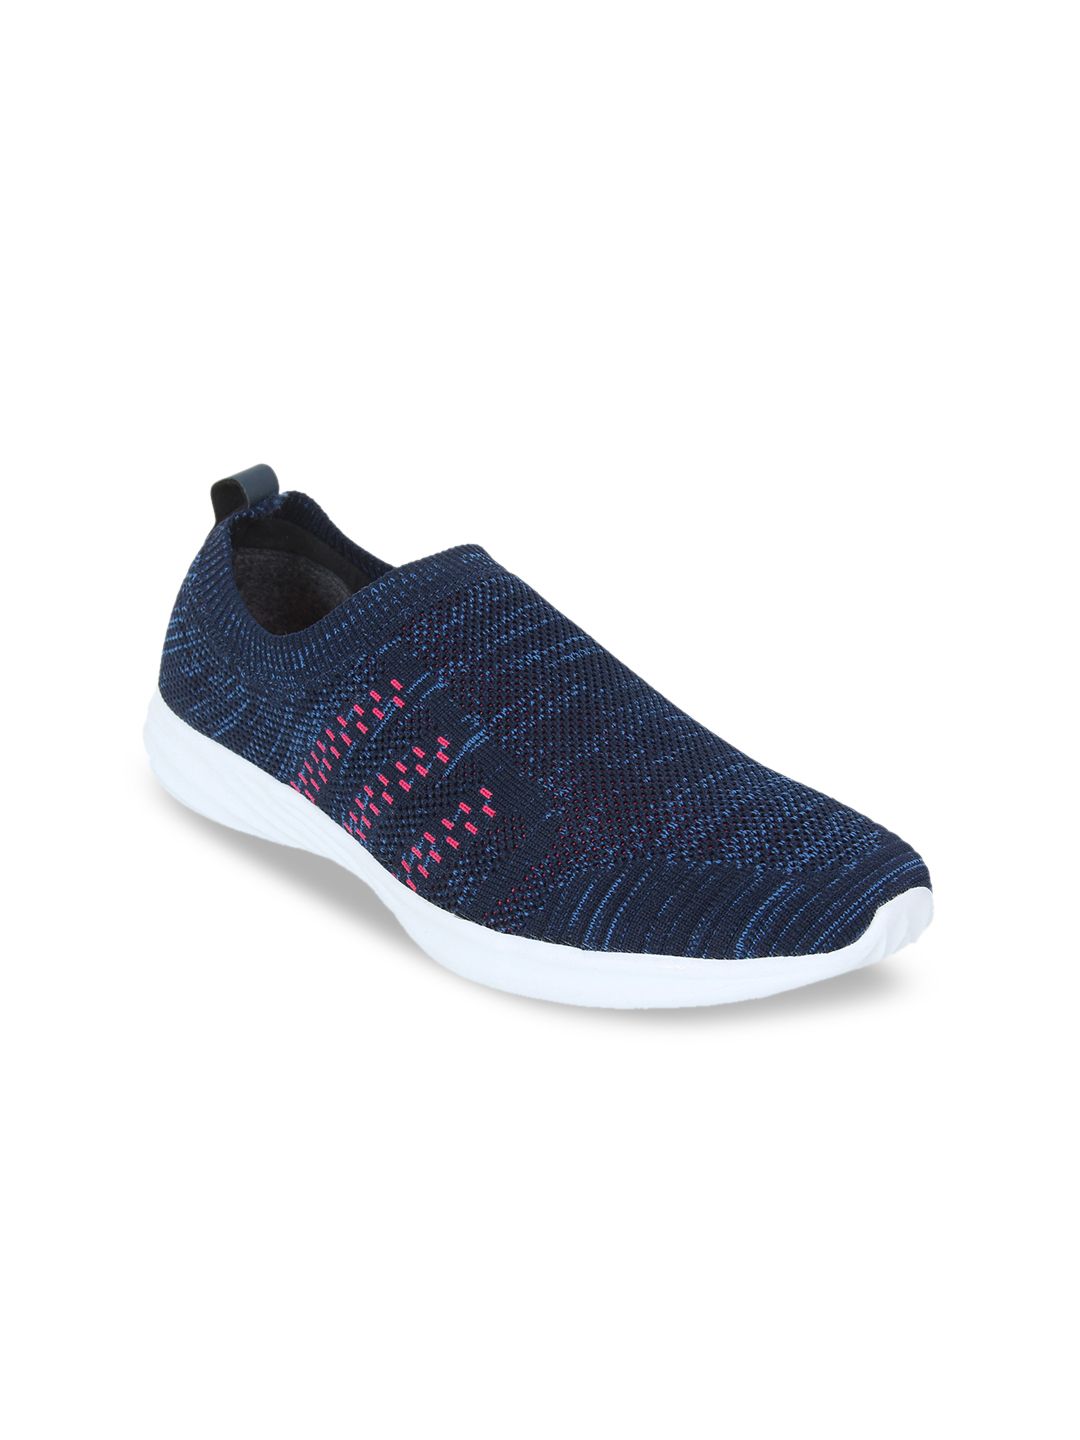 OFF LIMITS Women Navy Blue & Red Mesh Walking Shoes Price in India